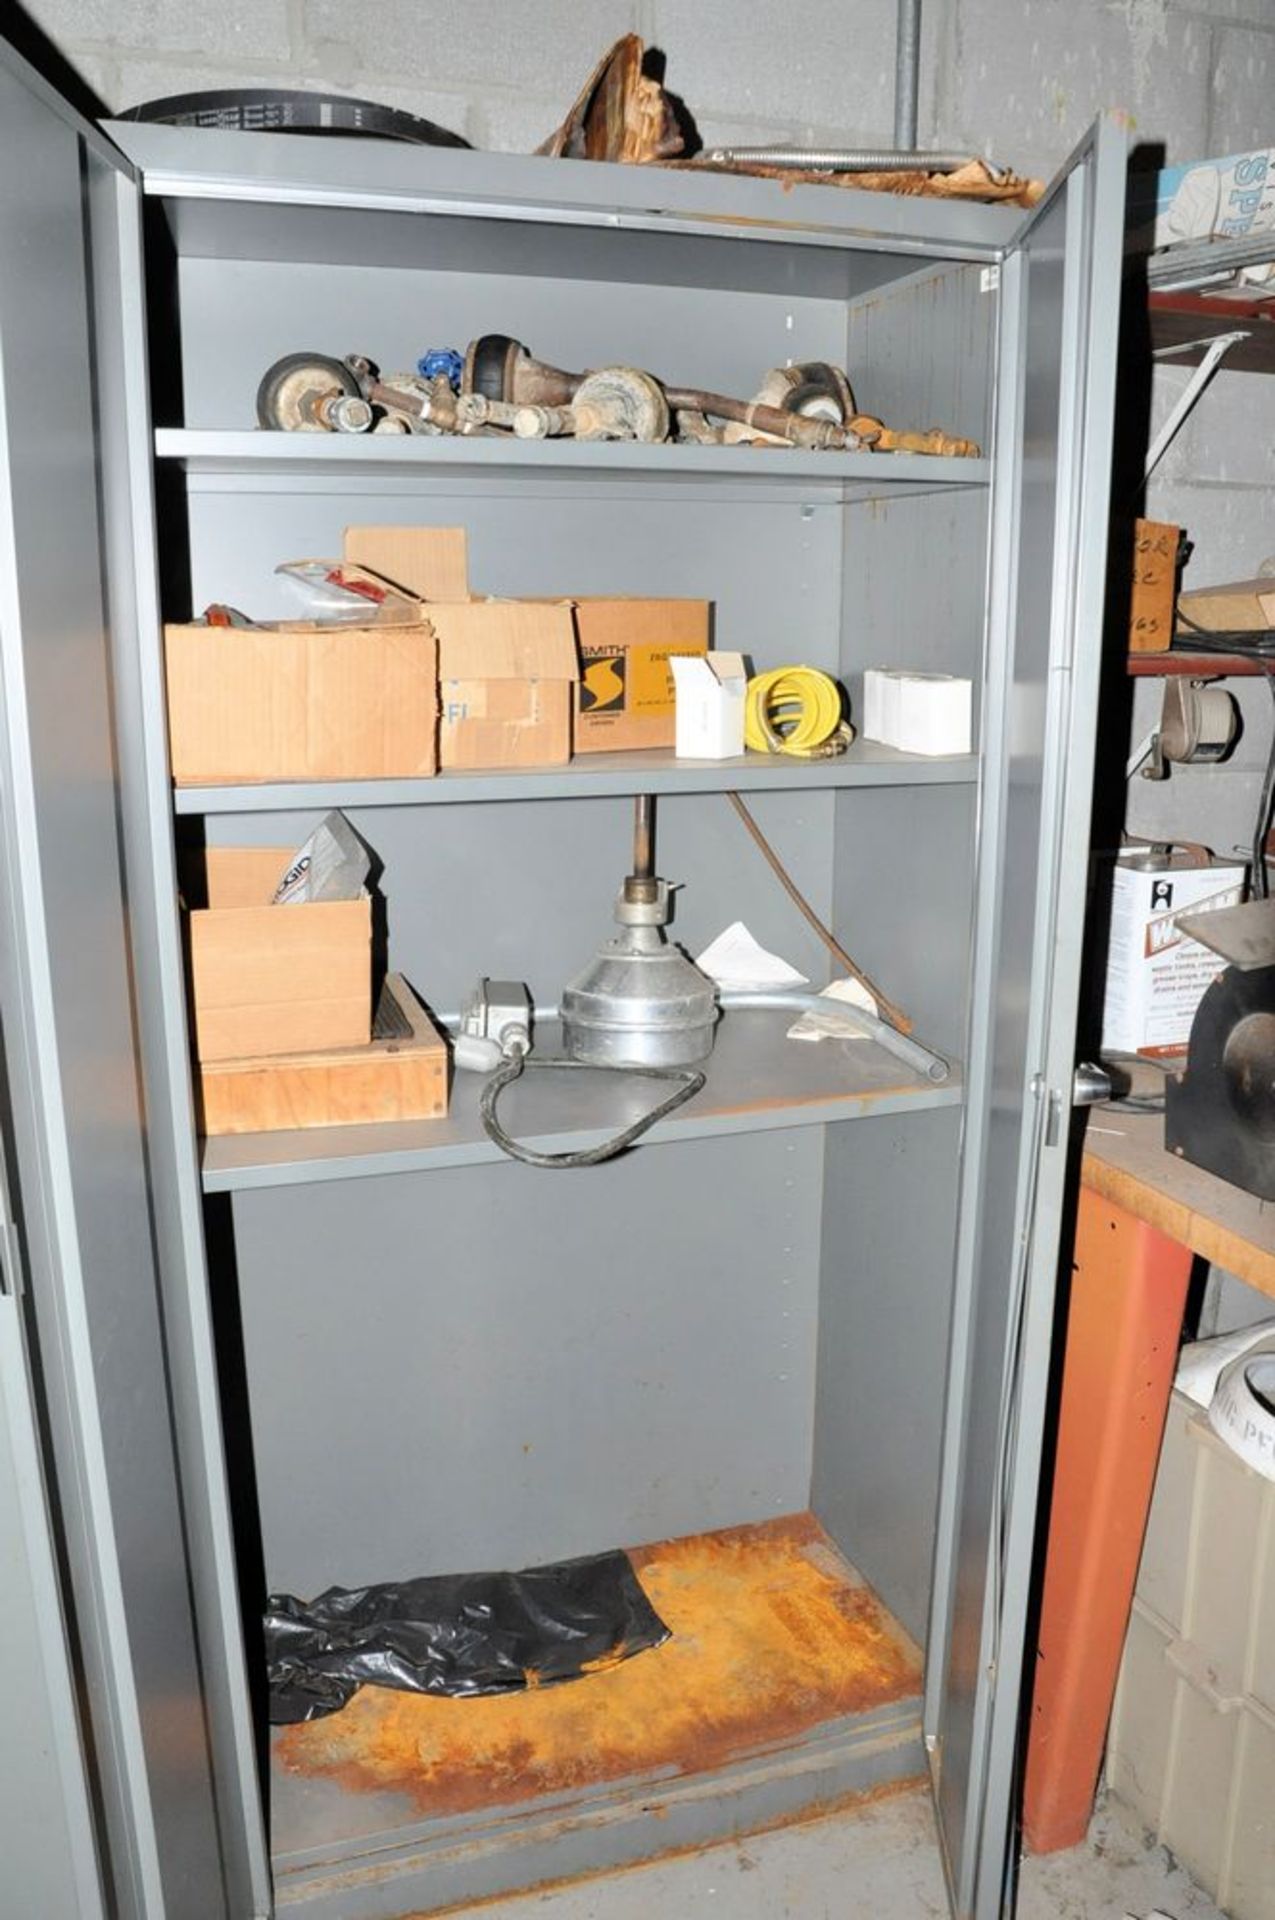 Lot-(1) Work Bench with Misc. Contents, Dayton Model 4Z908 6" x 1/2-HP Double End Bench Top Grinder, - Image 3 of 5